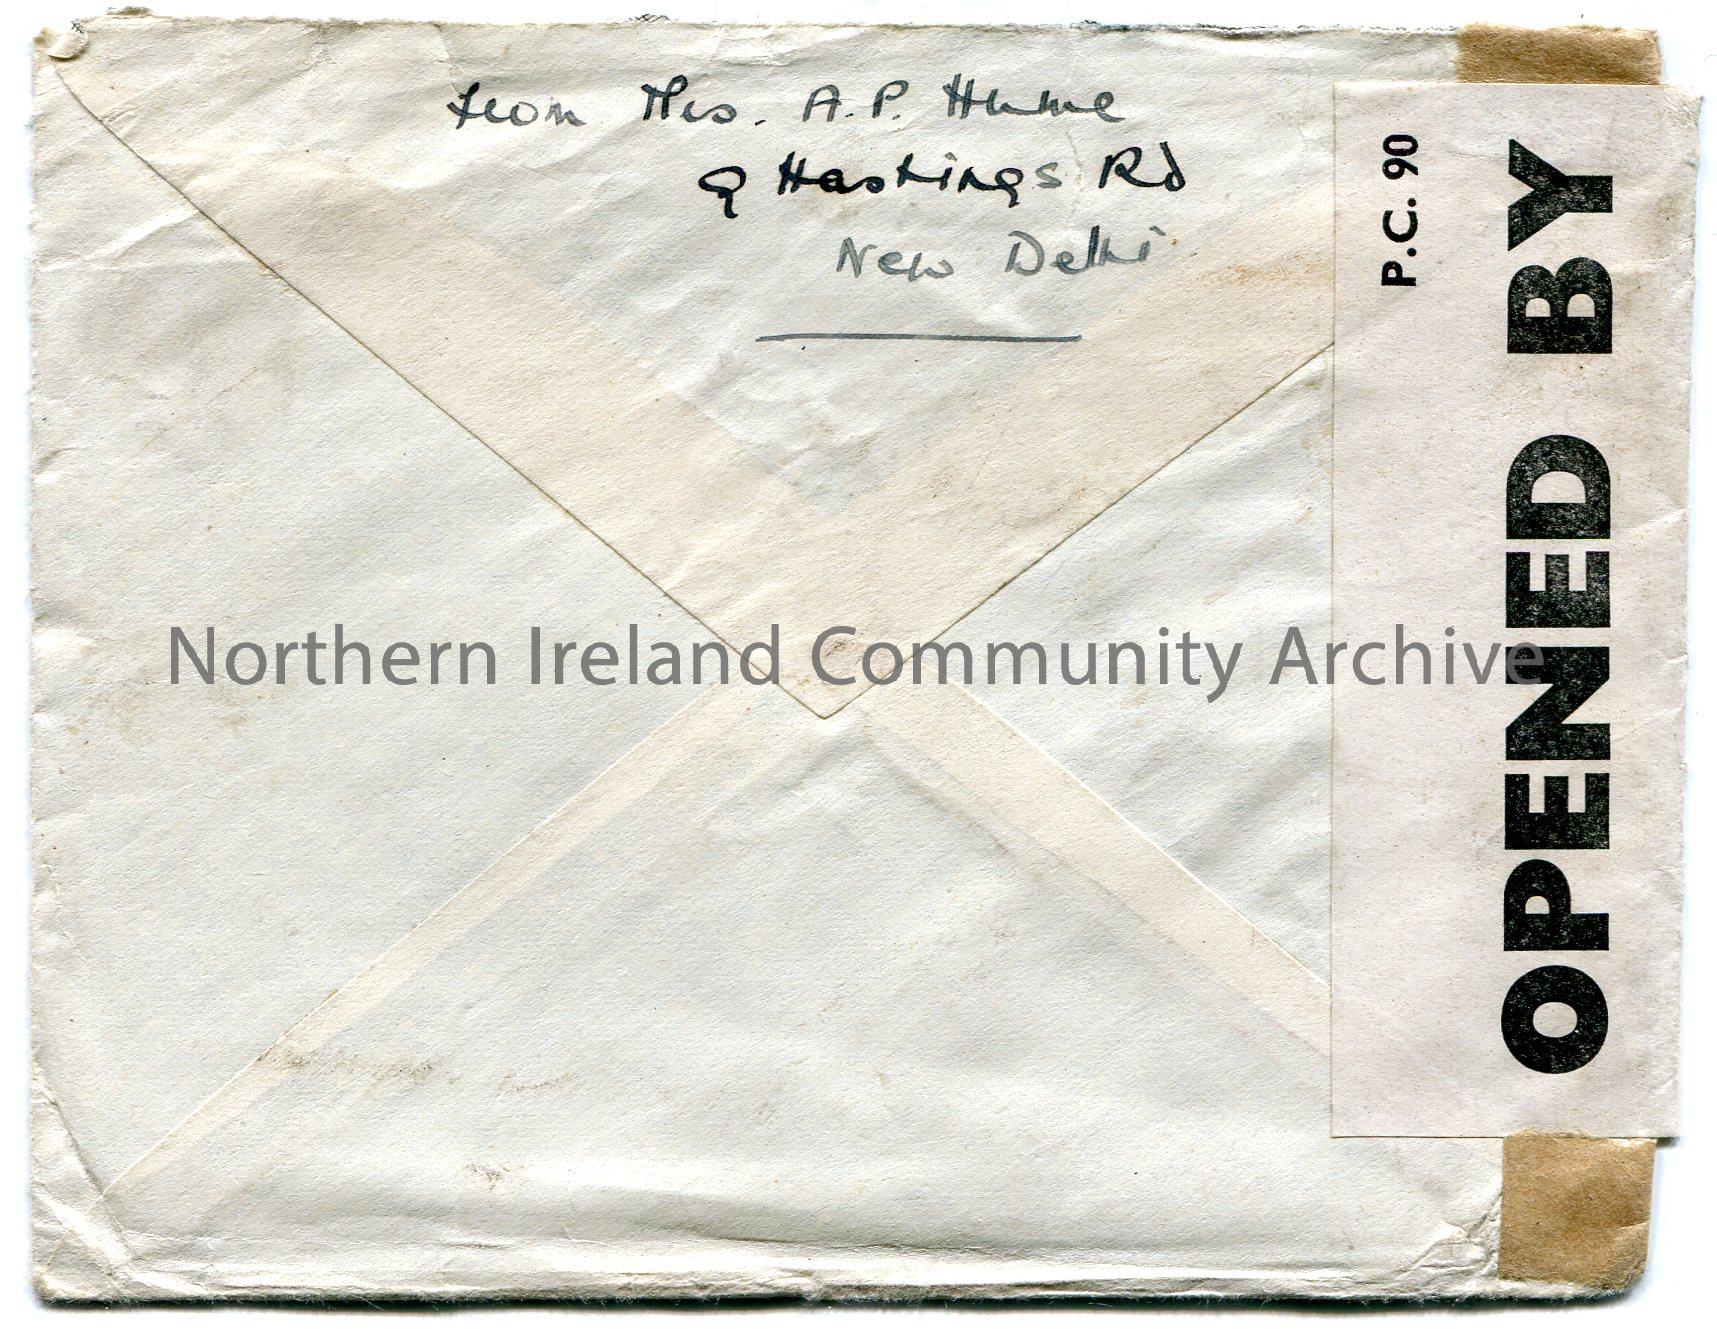 Handwritten envelope addressed to Mrs Hezlet Bovagh Aghadowey, Co. Derry, N. Ireland. From Mrs A. P. Hume, 8 Hastings Road, New Delhi. Sent by Air Mai… – scan153b